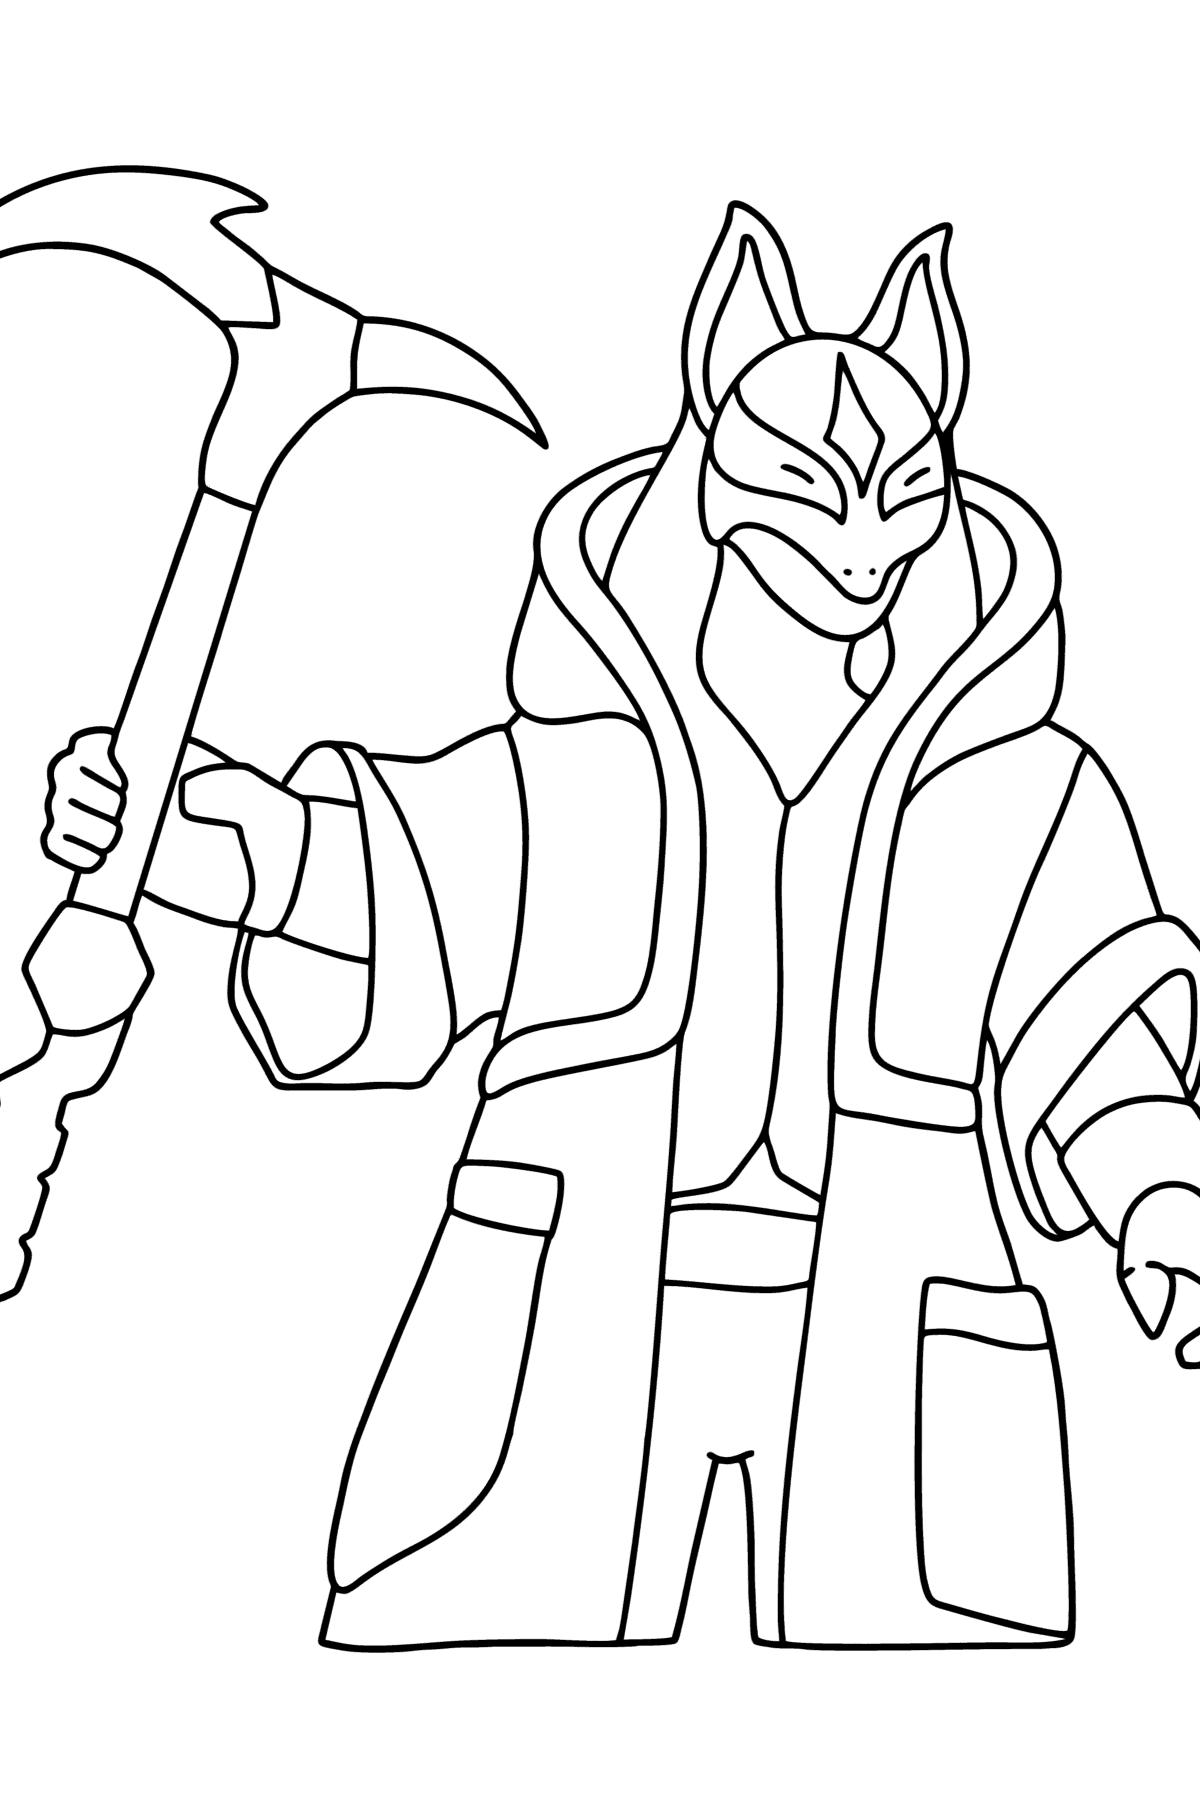 Fortnite Drift coloring page ♥ Online and Print for Free!